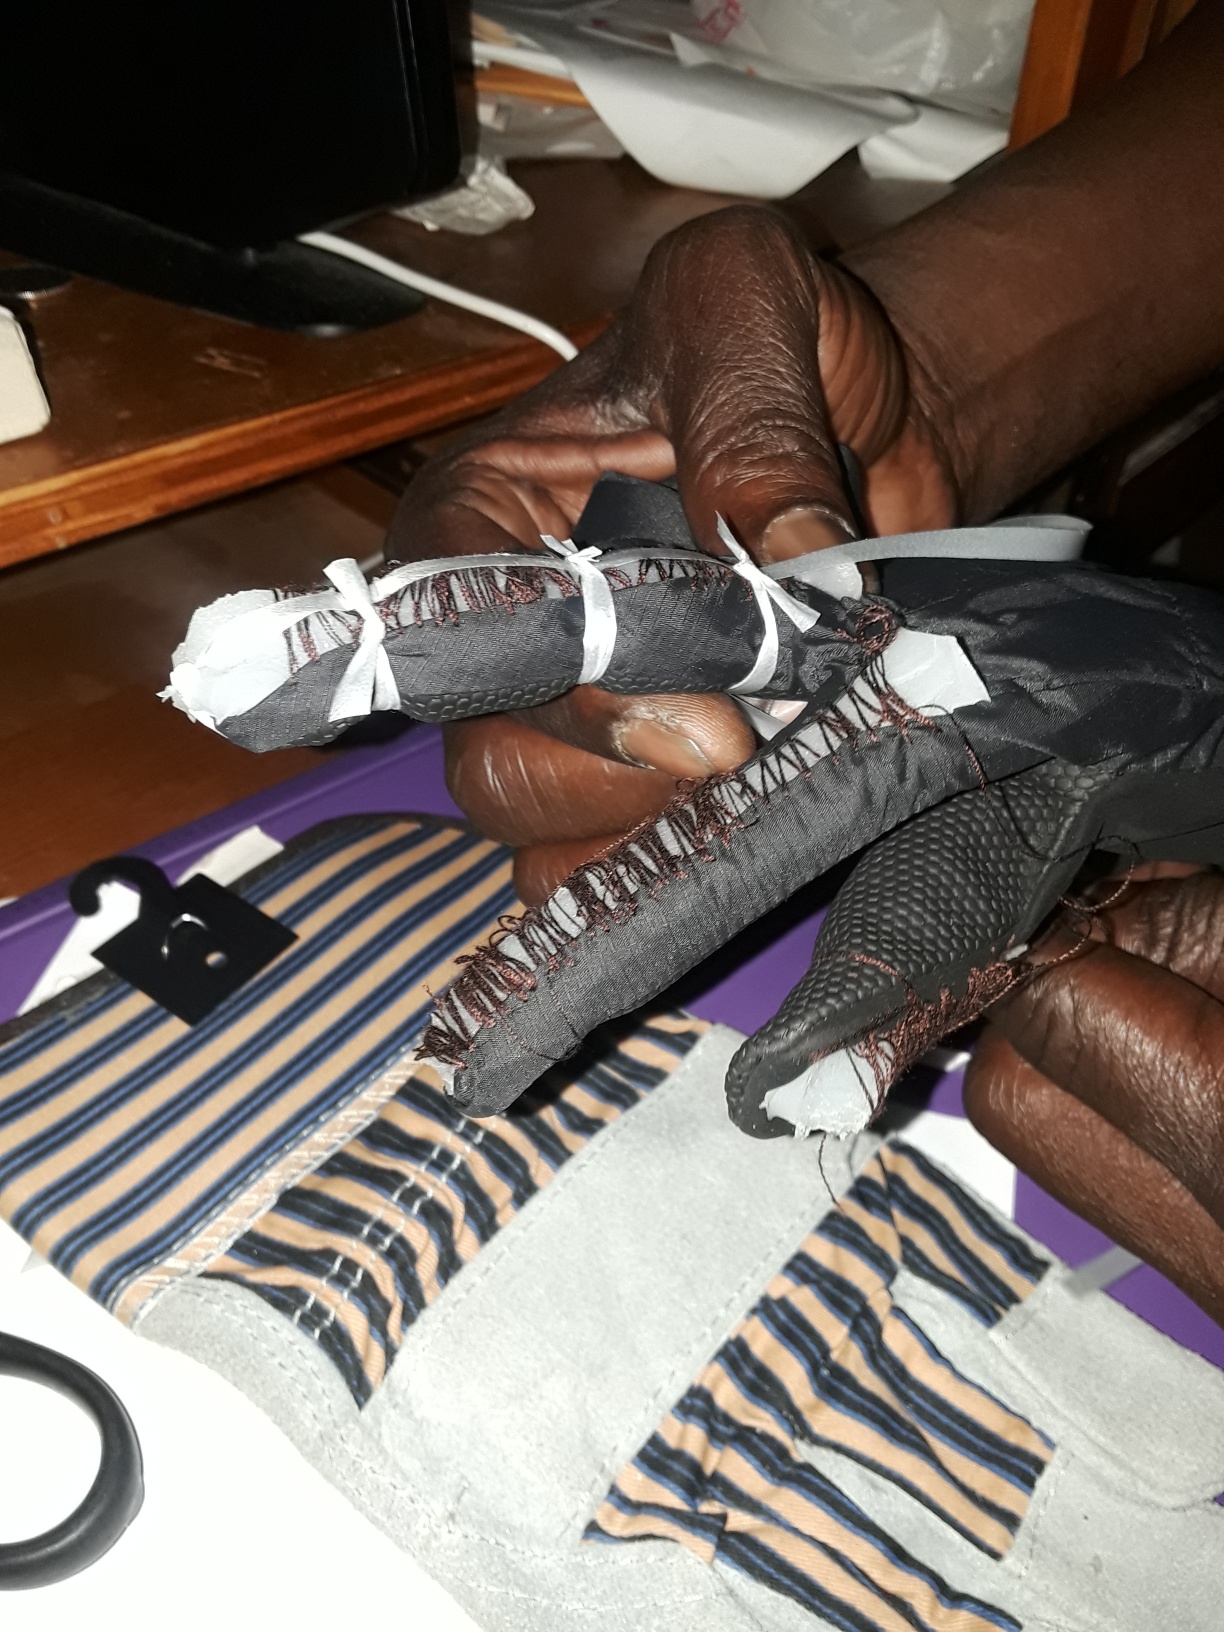 A soft robotic glove prosthetic to help those with neuromuscular disorders.